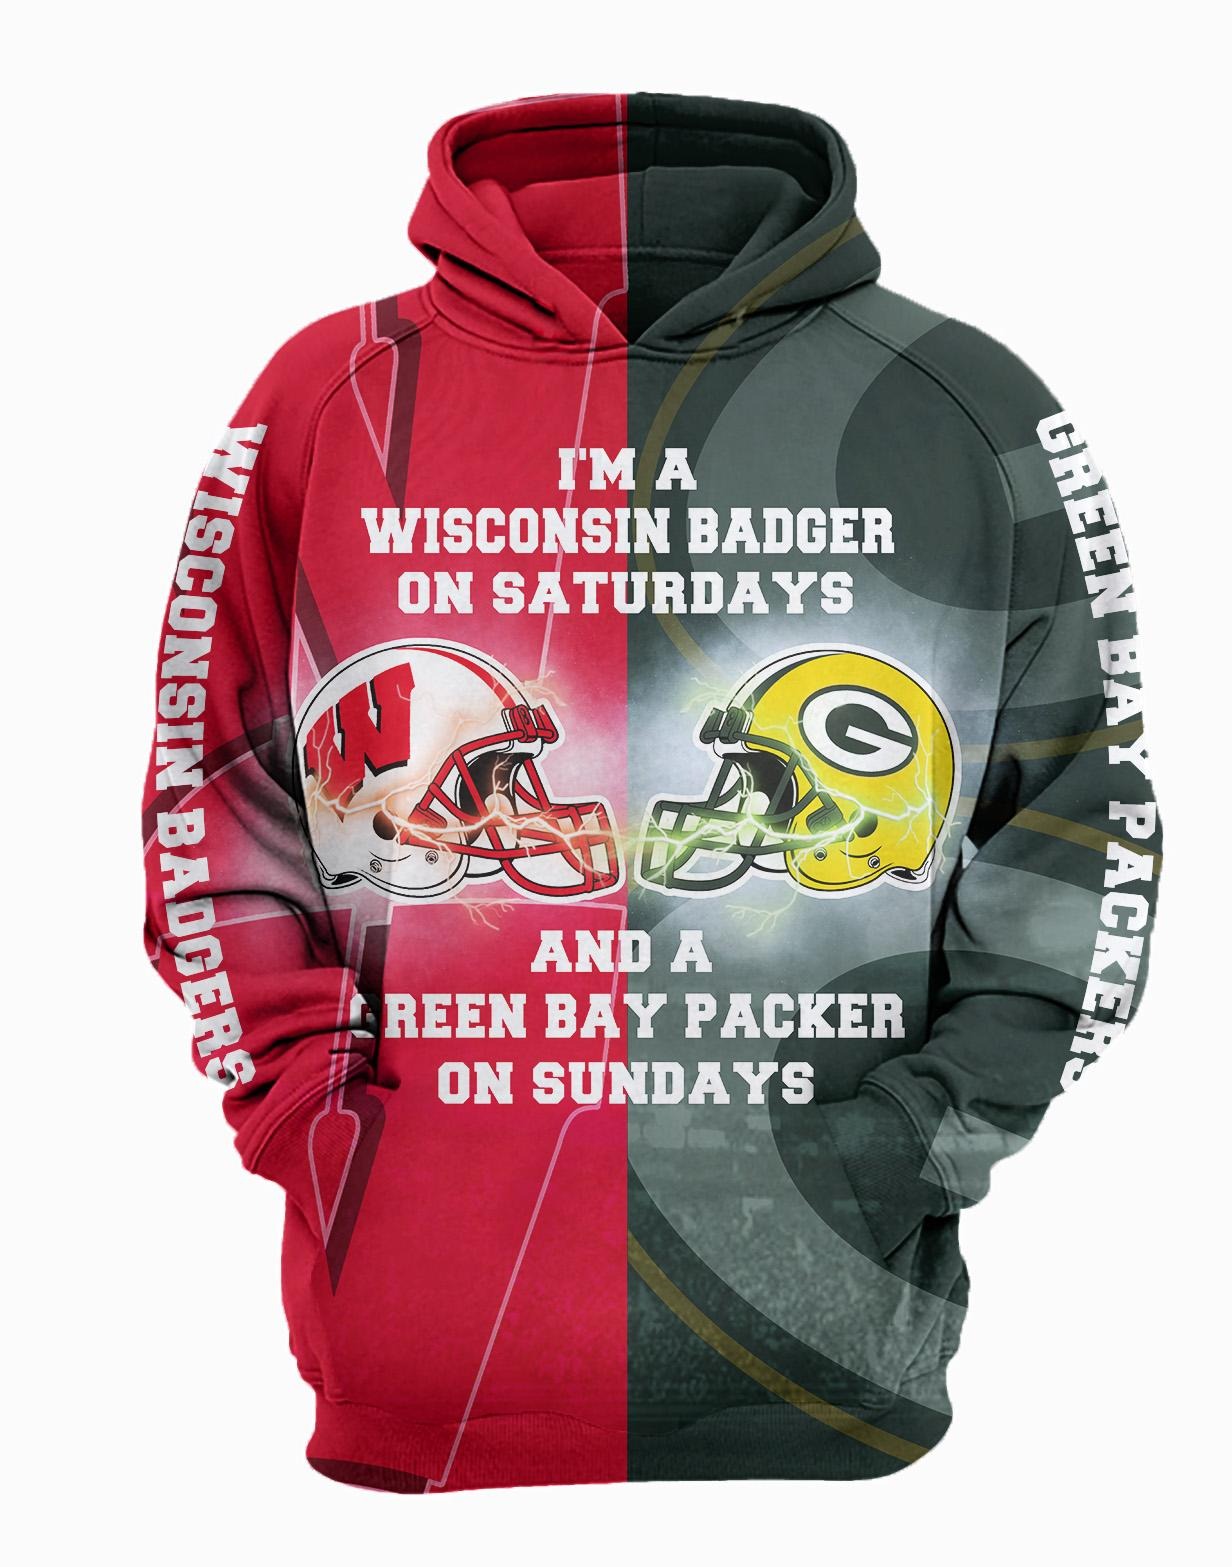 Wisconsin Badger on Saturdays and Green Bay Packers on Sundays 3d hoodies